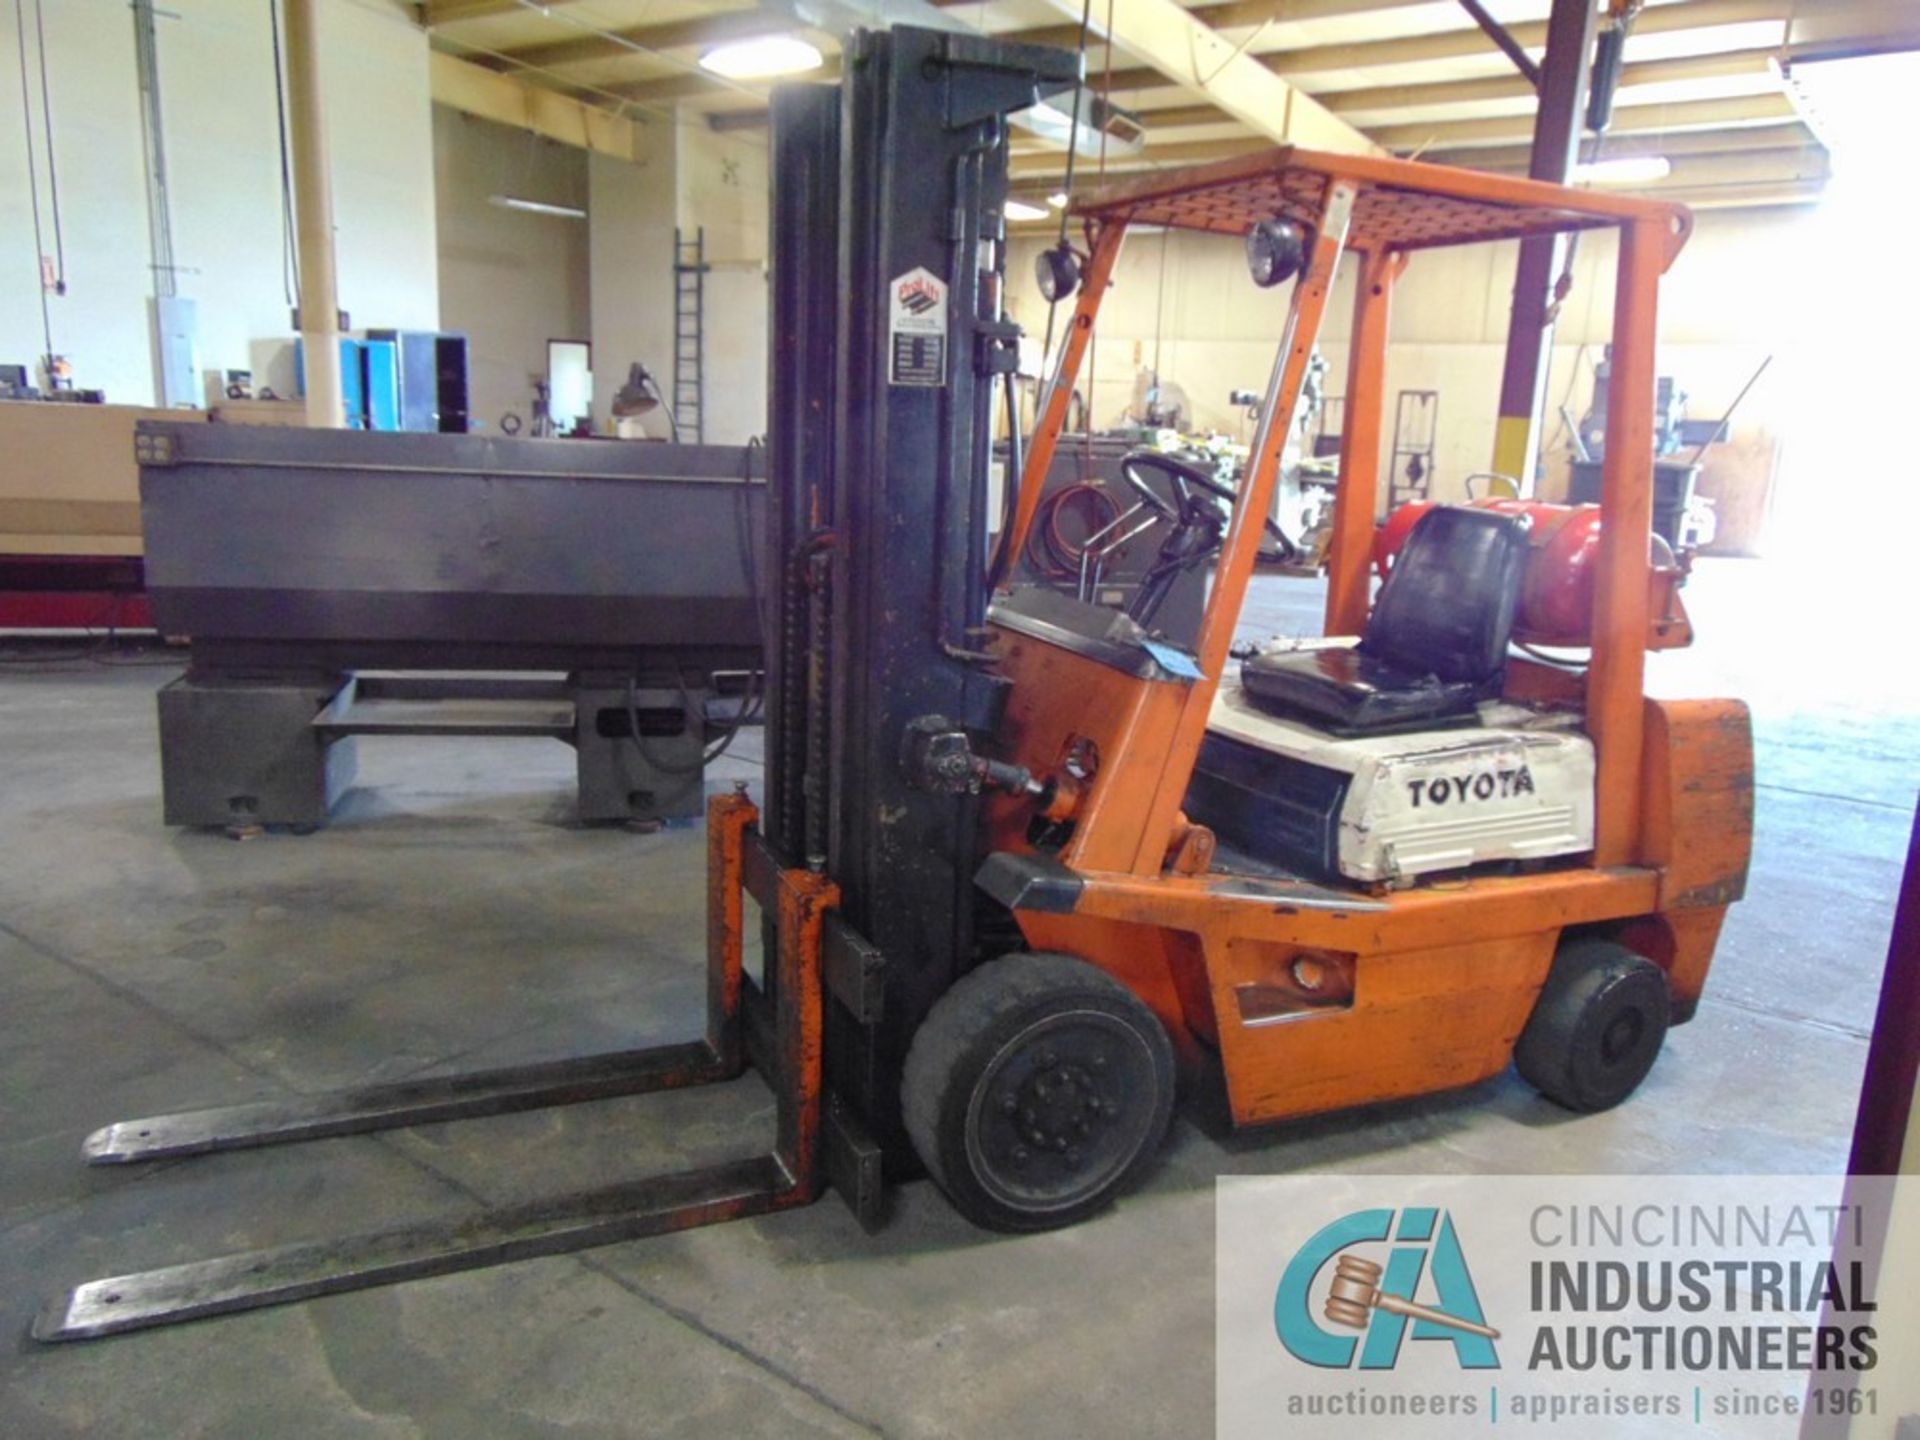 6,000 LB. TOYOTA MODEL FGC30 LP GAS SOLID TIRE LIFT TRUCK; S/N 10358, 169" LIFT HEIGHT, 48" FORKS,